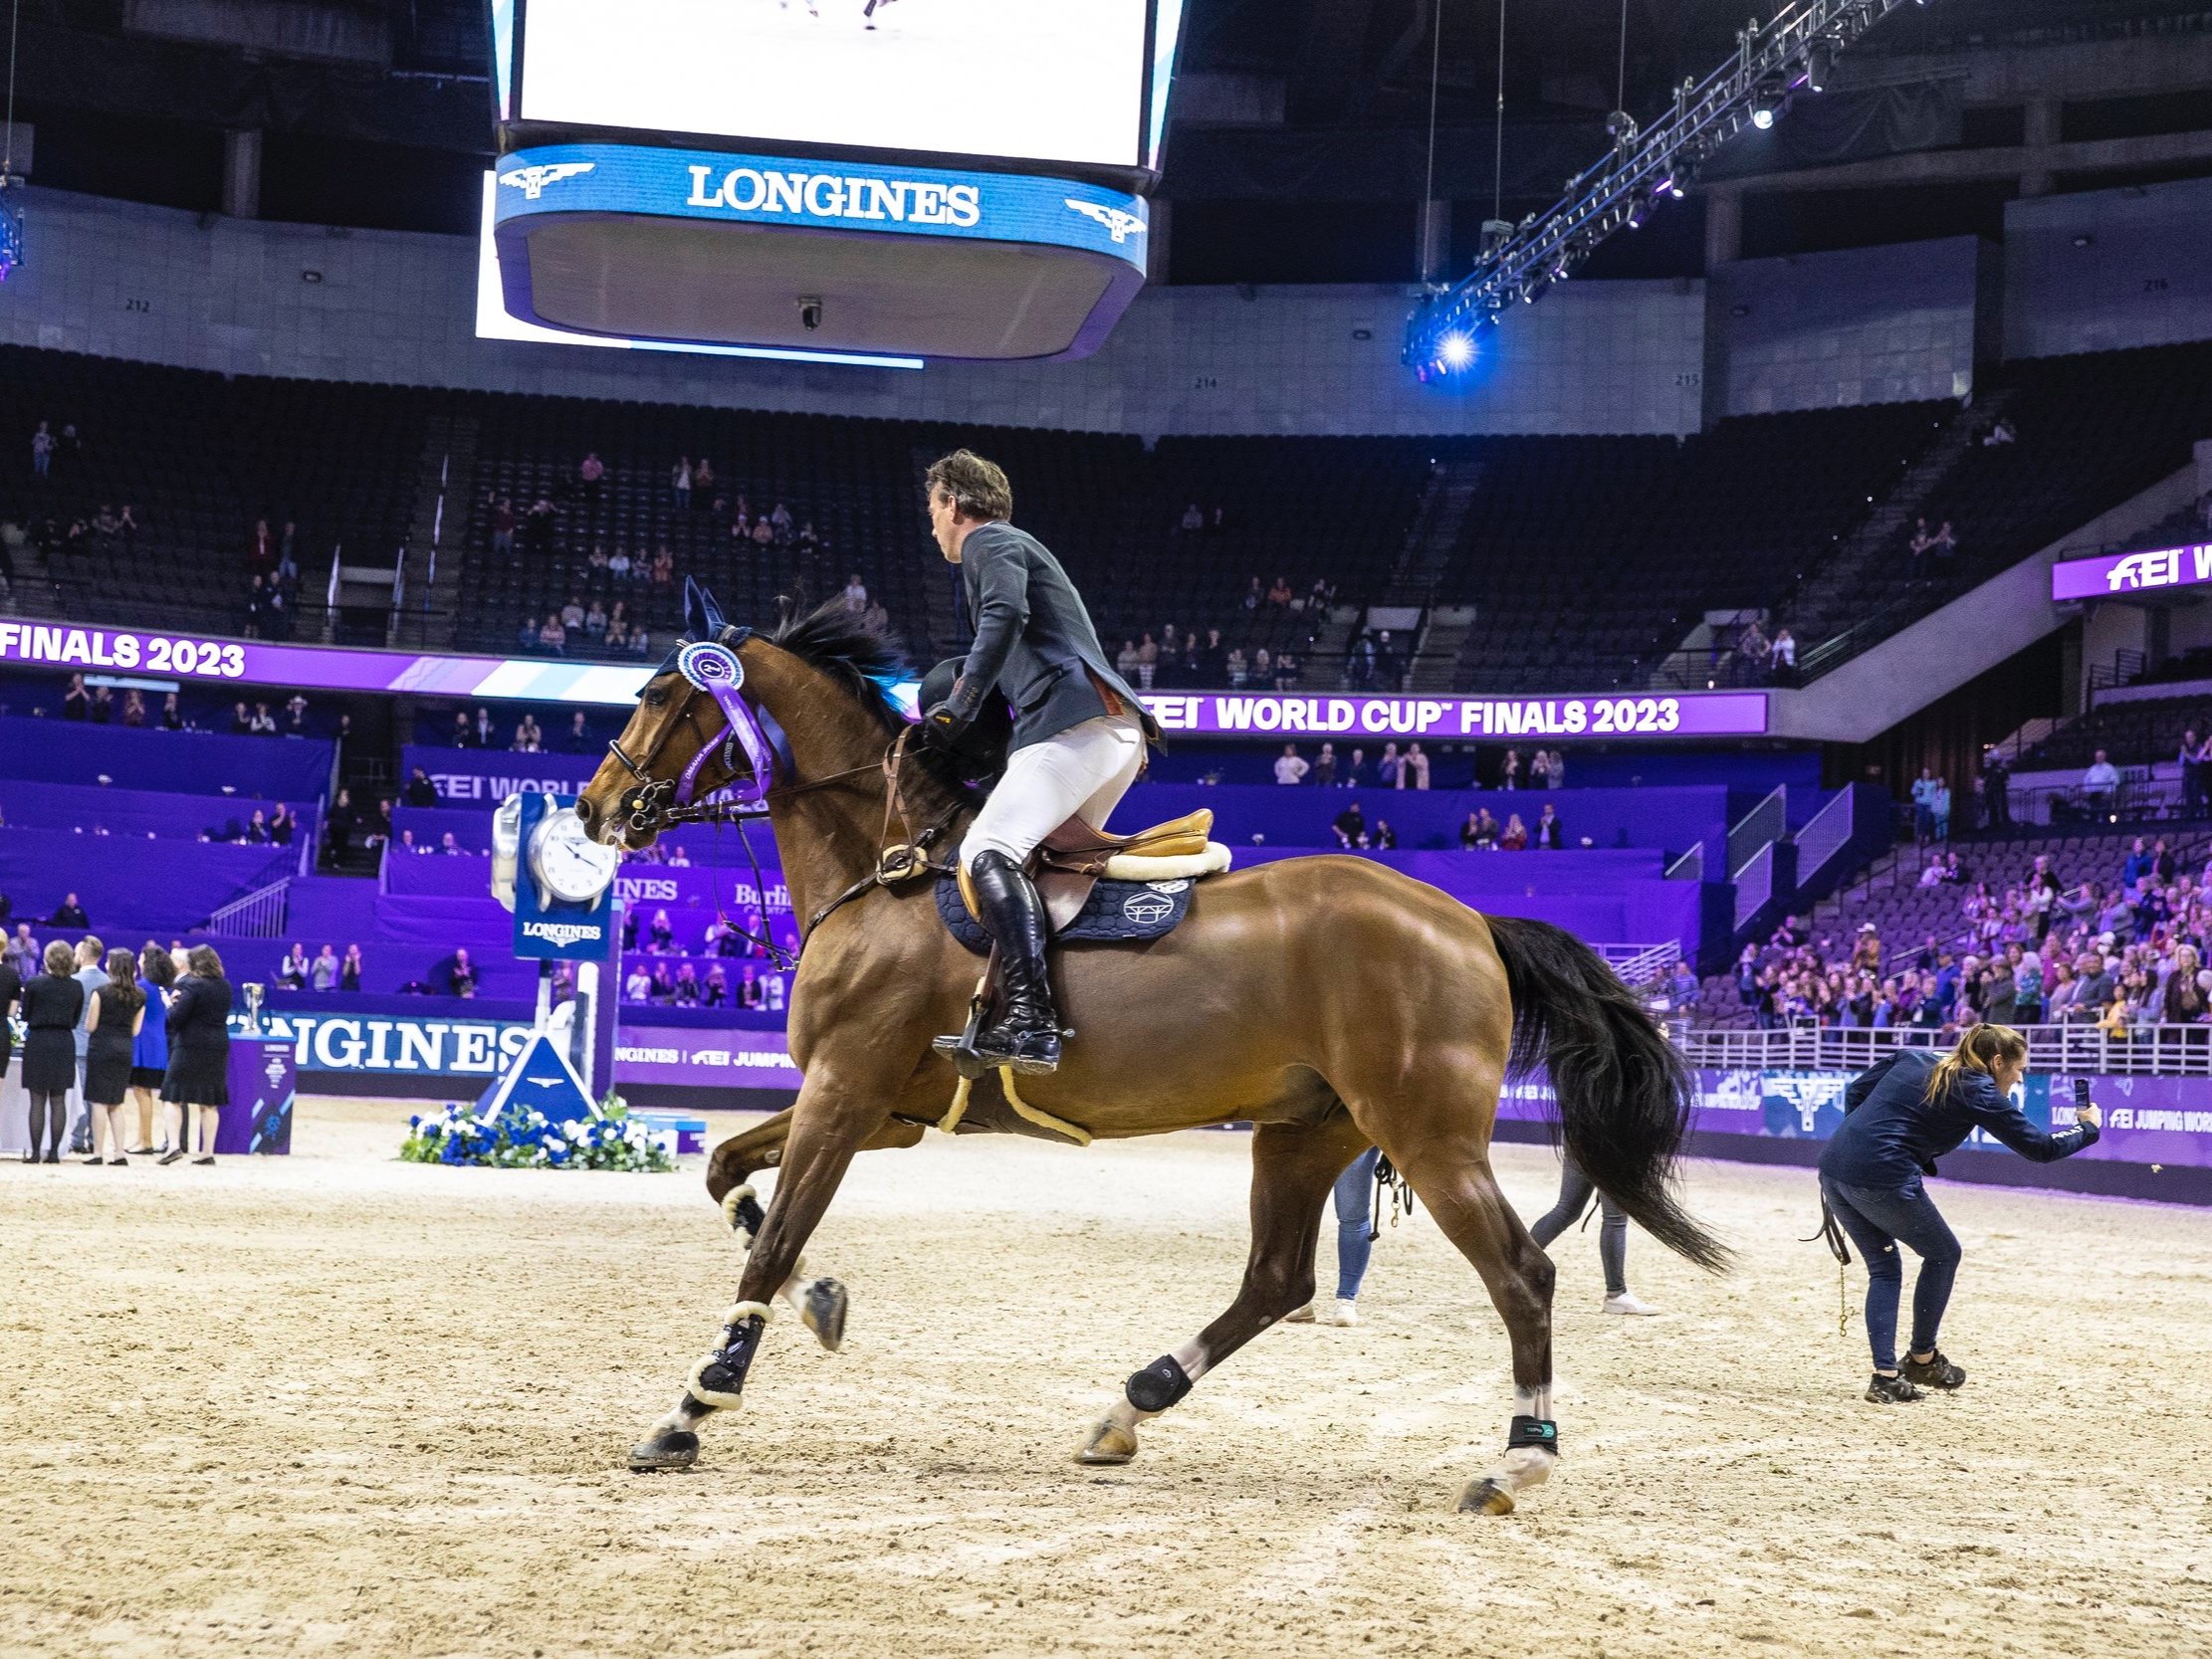  Harrie Smolders riding Monica to 2nd place at FEI 2023 Jumping World Cup Finals in Omaha. 